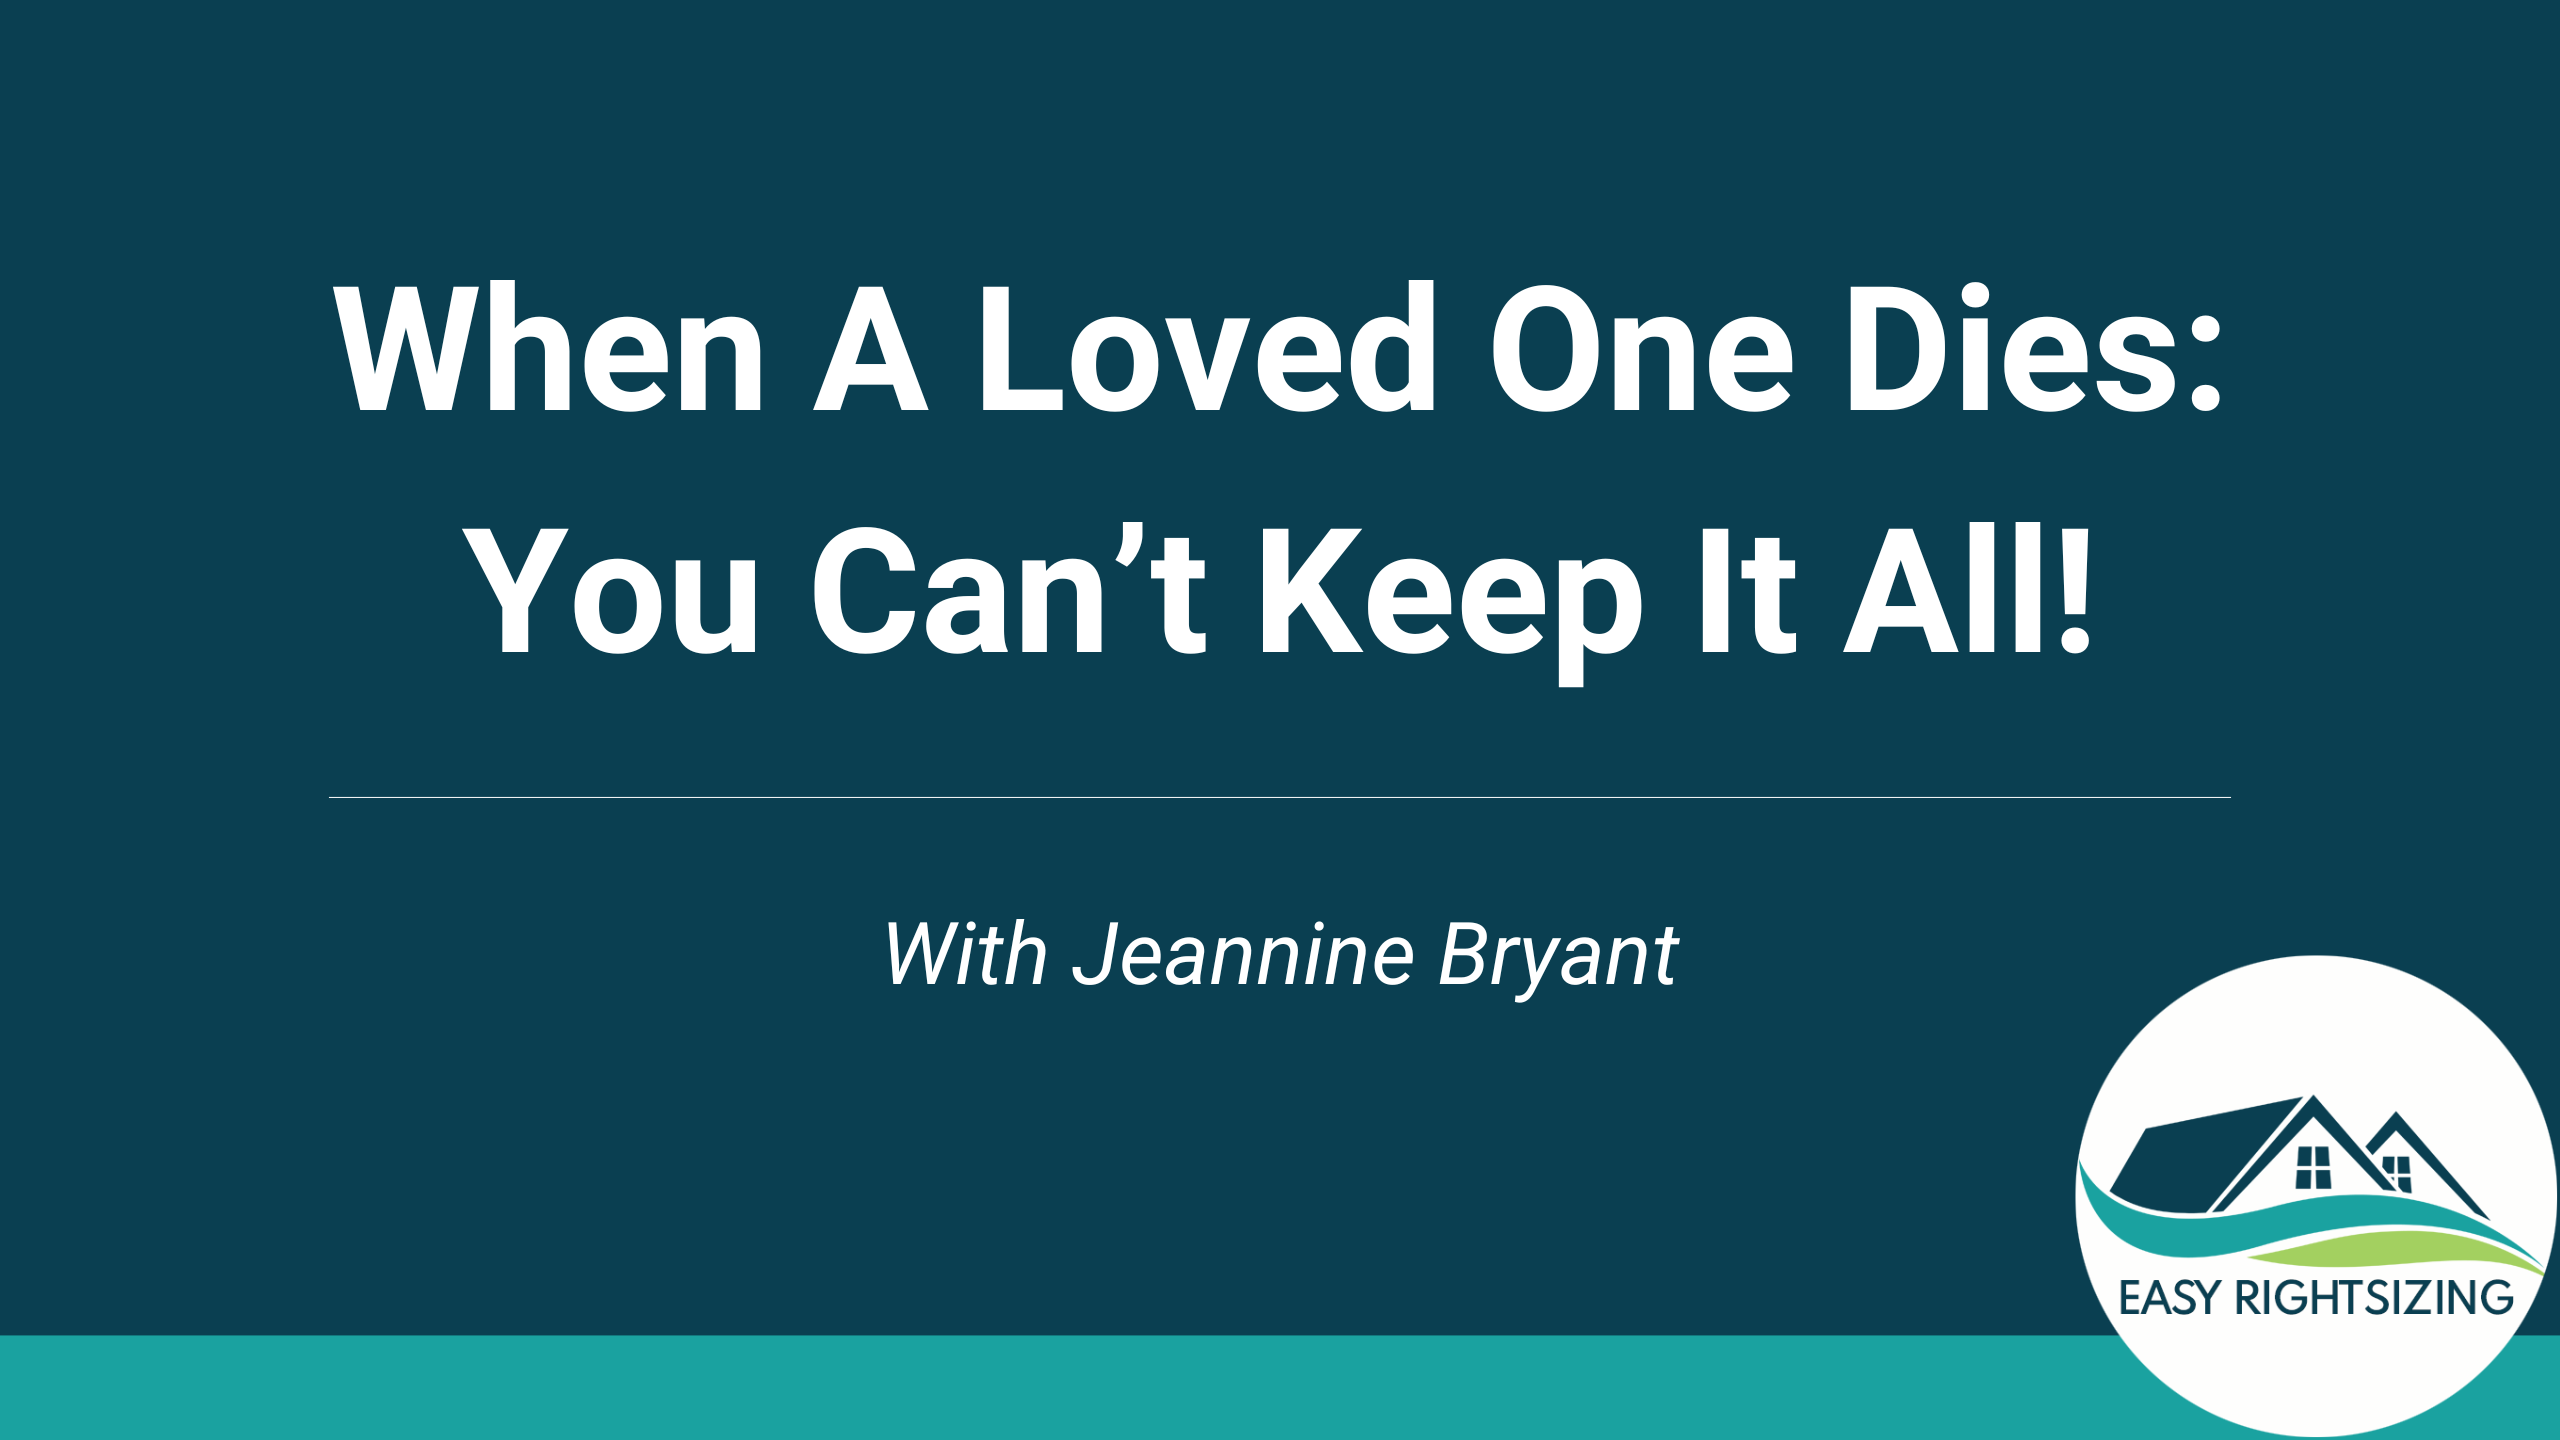 When A Loved One Dies: You Can’t Keep It All!